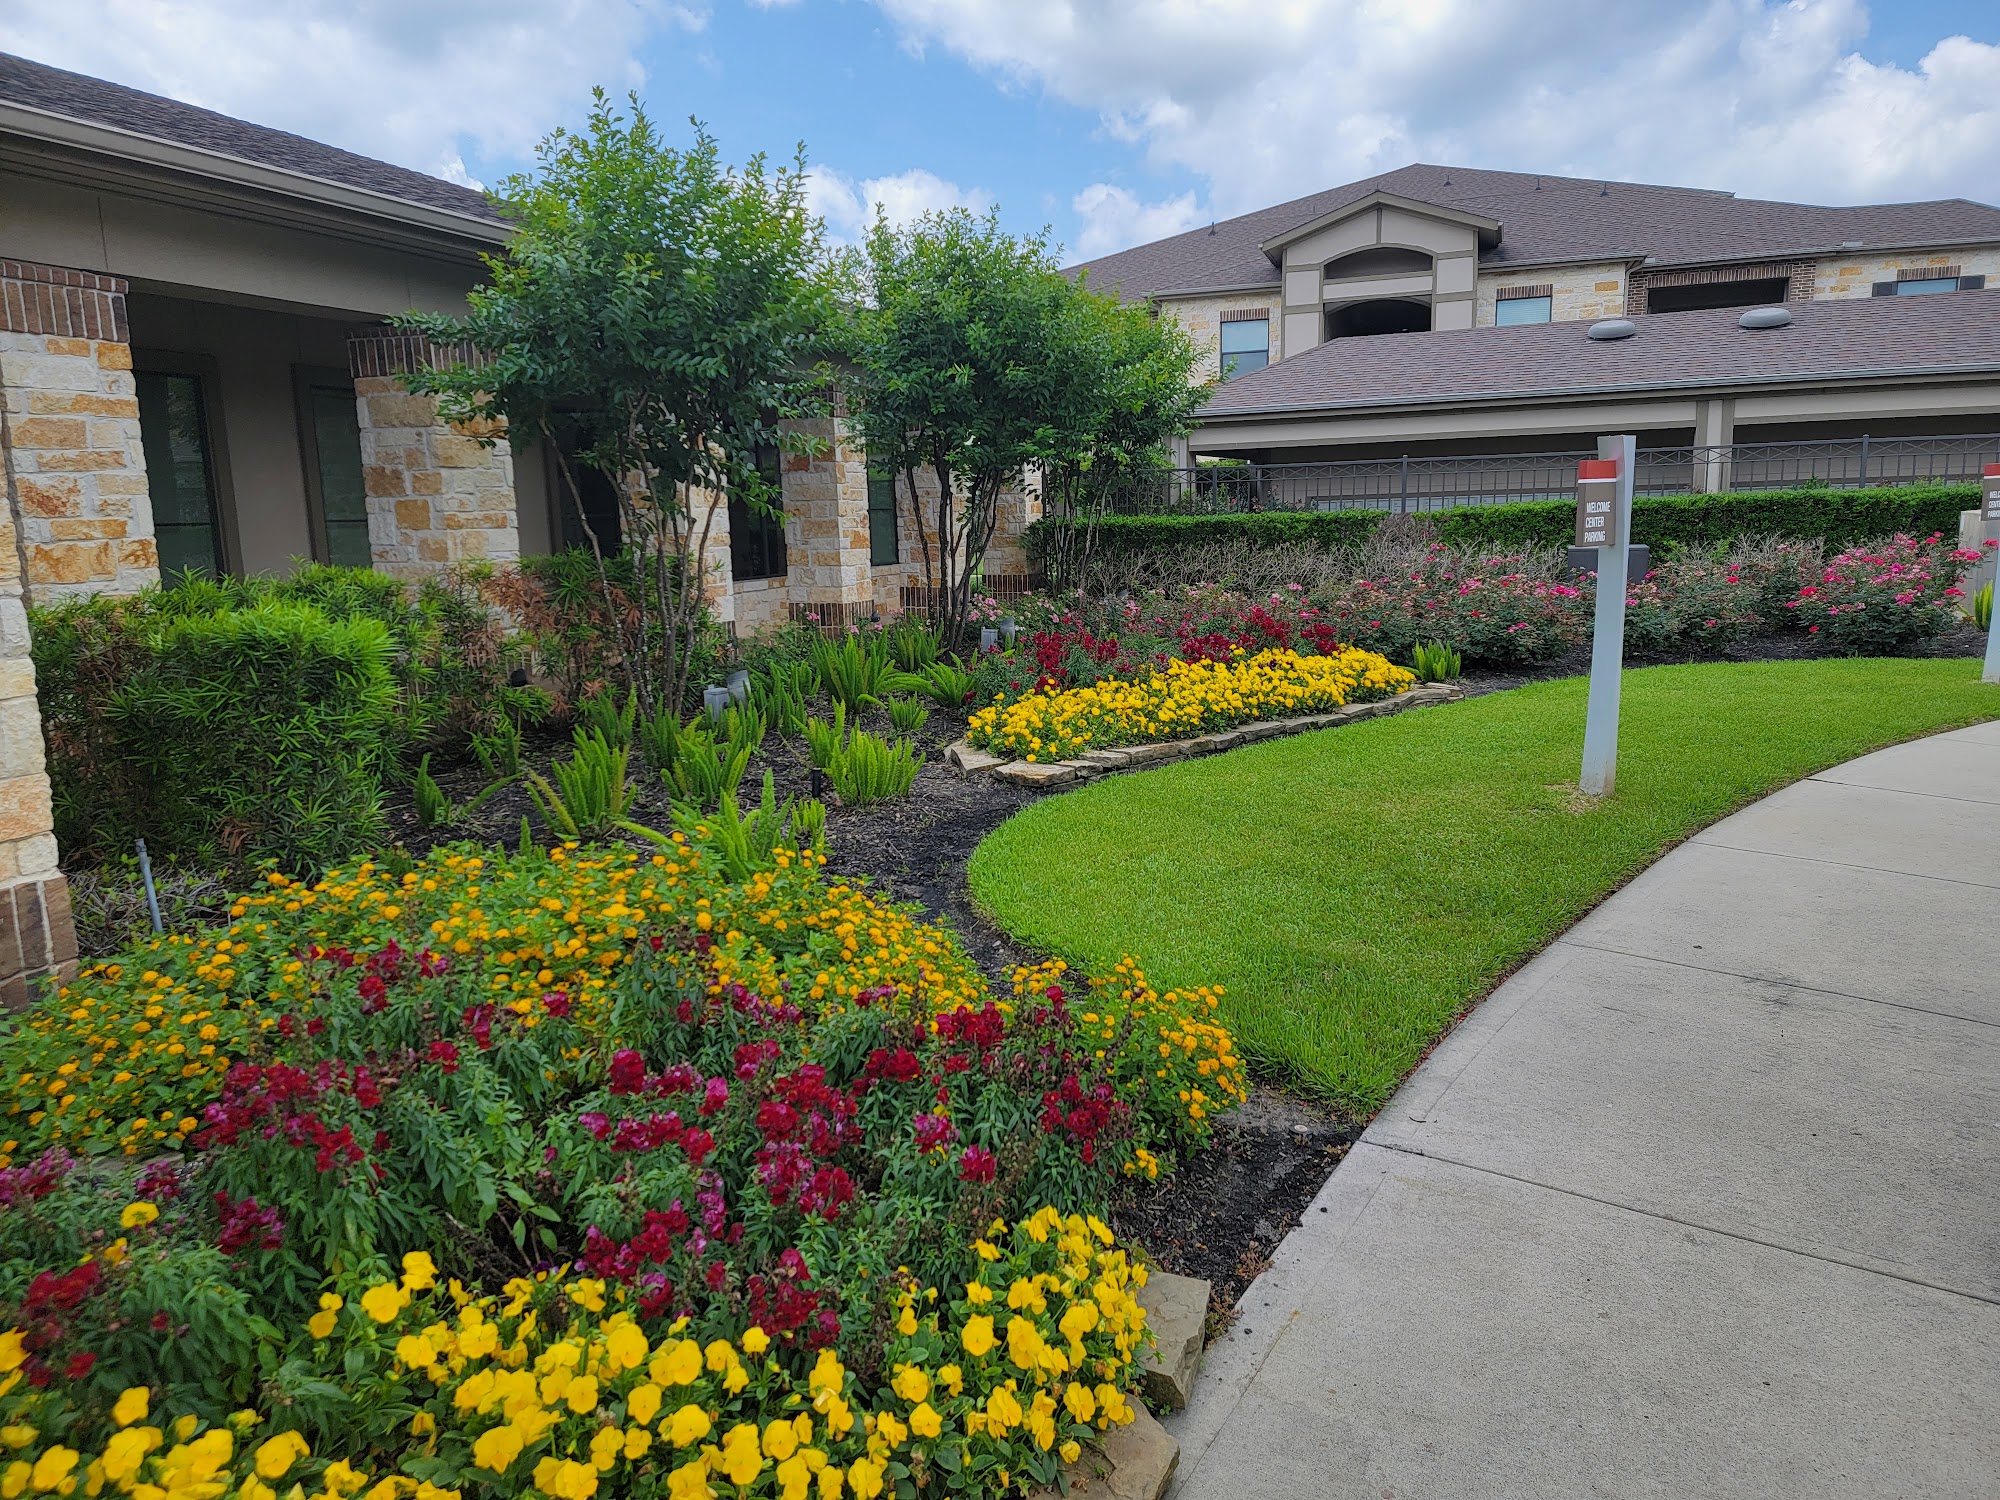 The Preserve at Spring Creek Apartments in Tomball